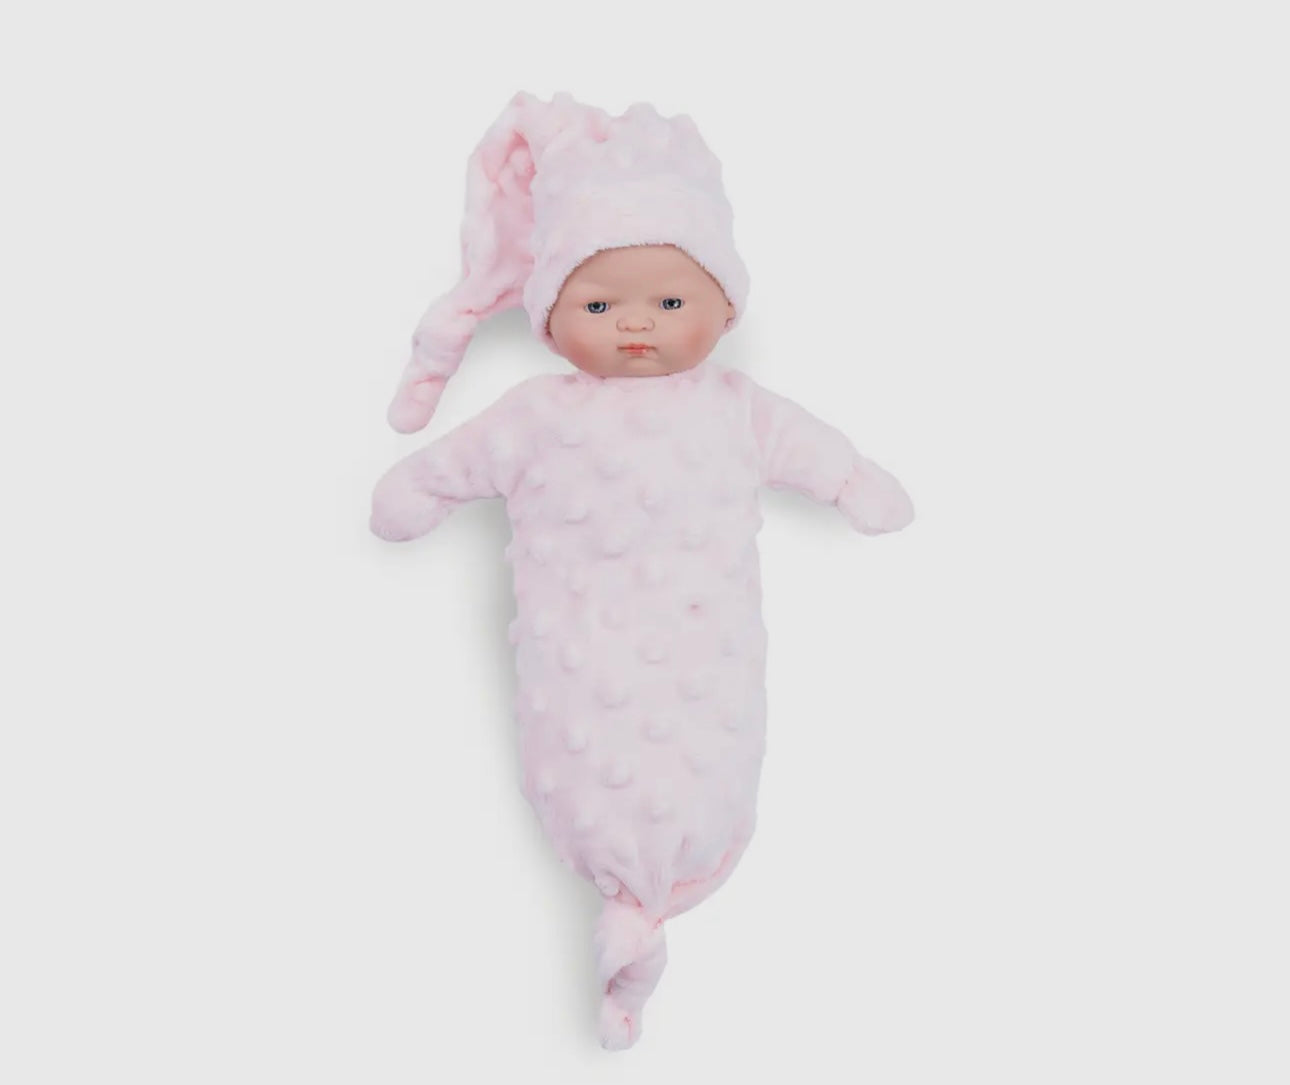 Soft Baby Pink Doll